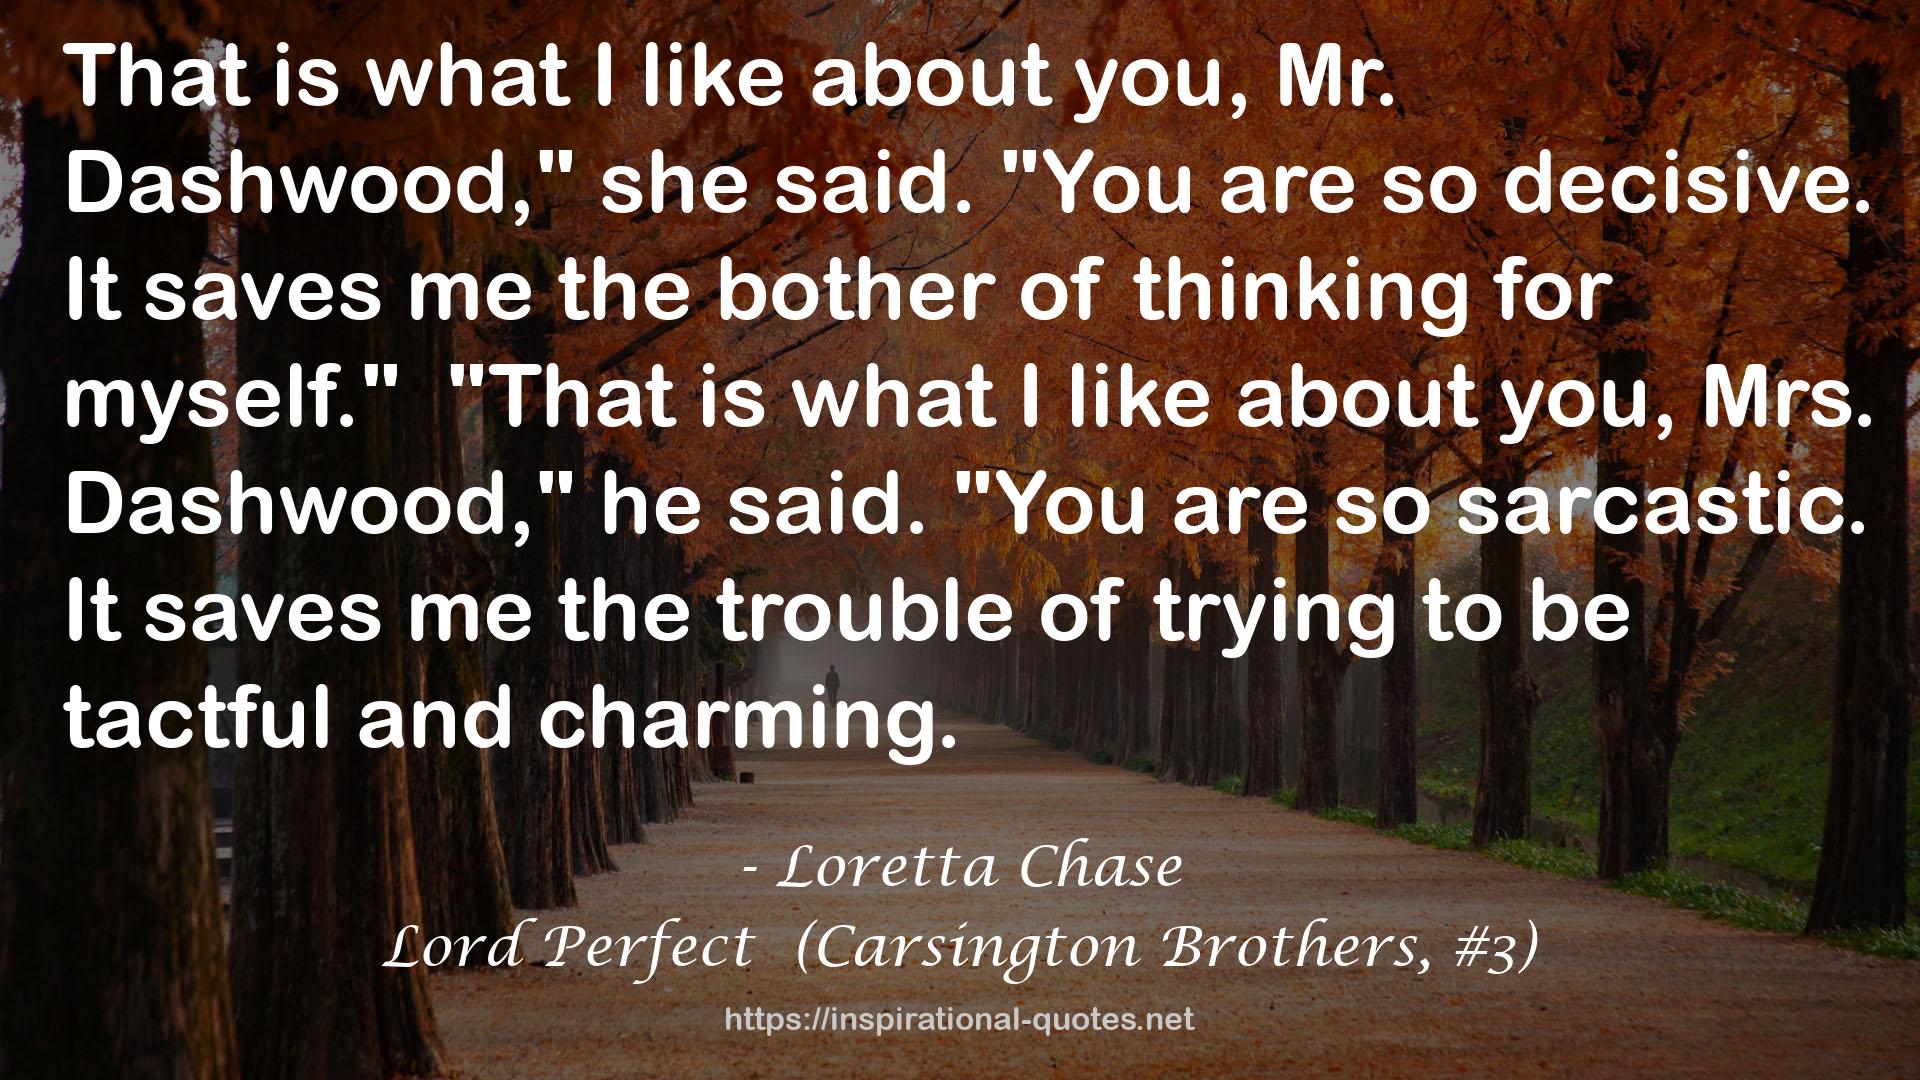 Lord Perfect  (Carsington Brothers, #3) QUOTES